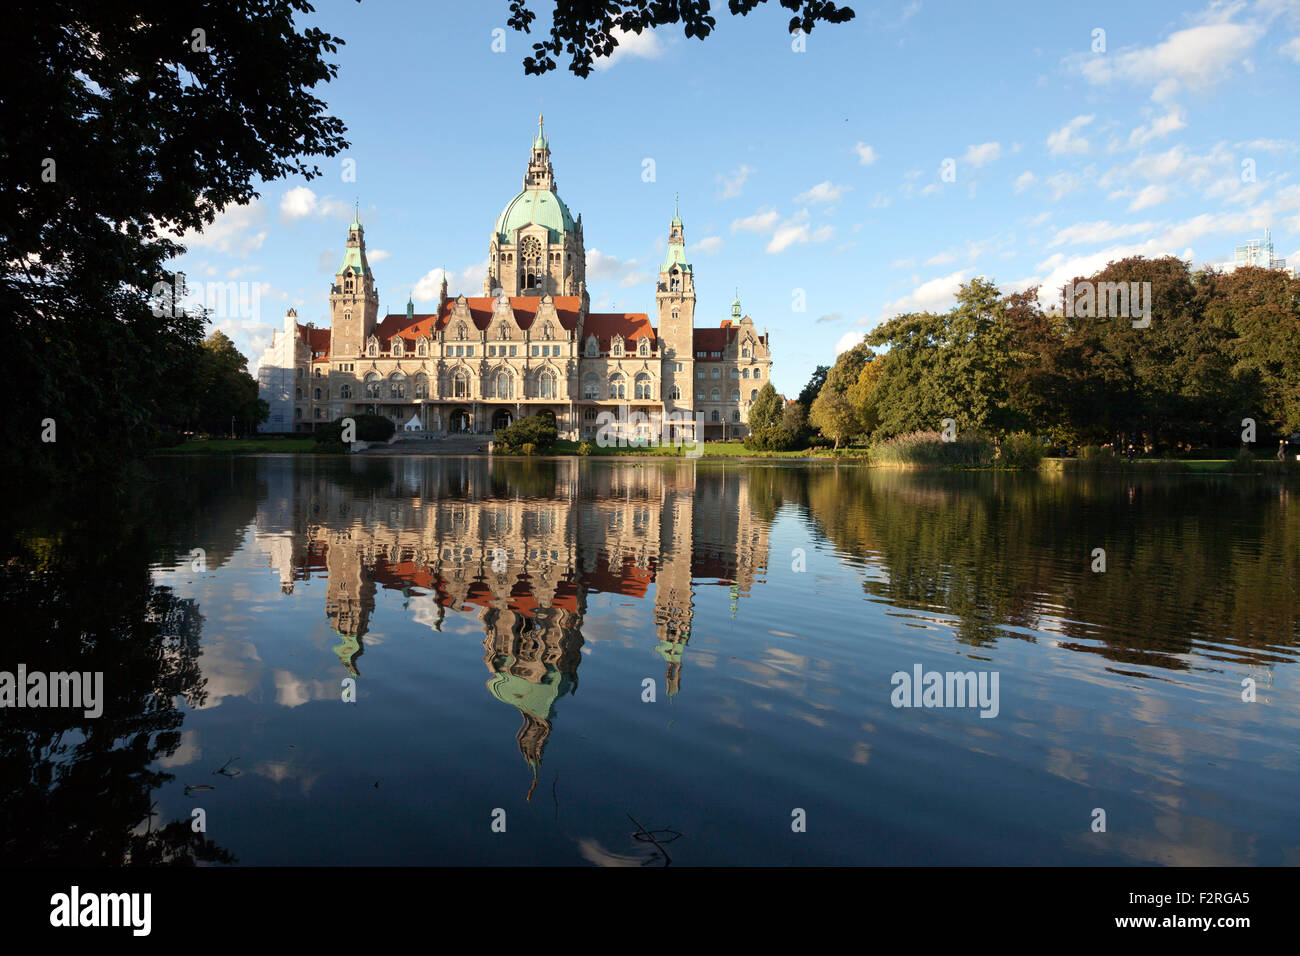 The New Town Hall and lake Maschteich in Hanover, Lower Saxony, Germany Stock Photo